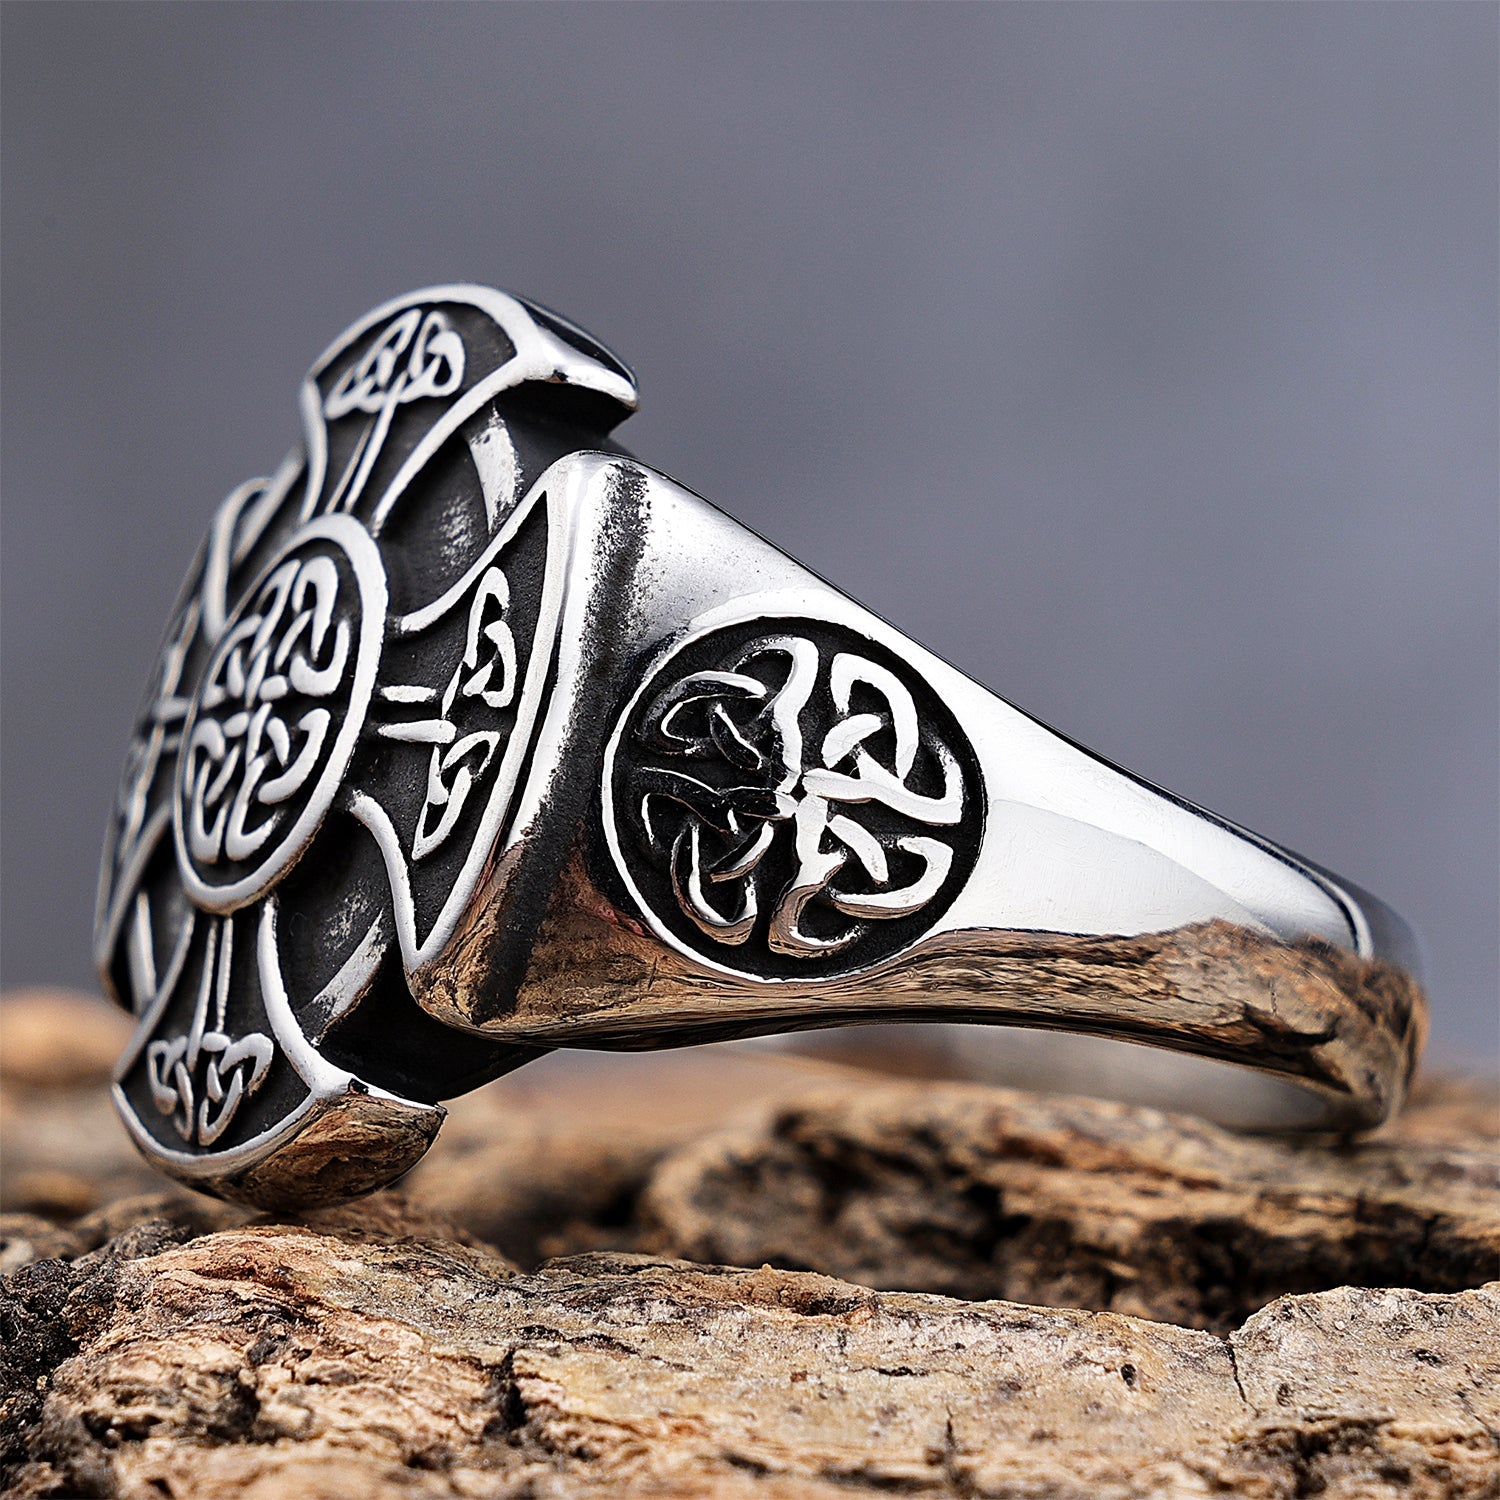 Equal-armed Celtic Cross Ring with Inner Circle